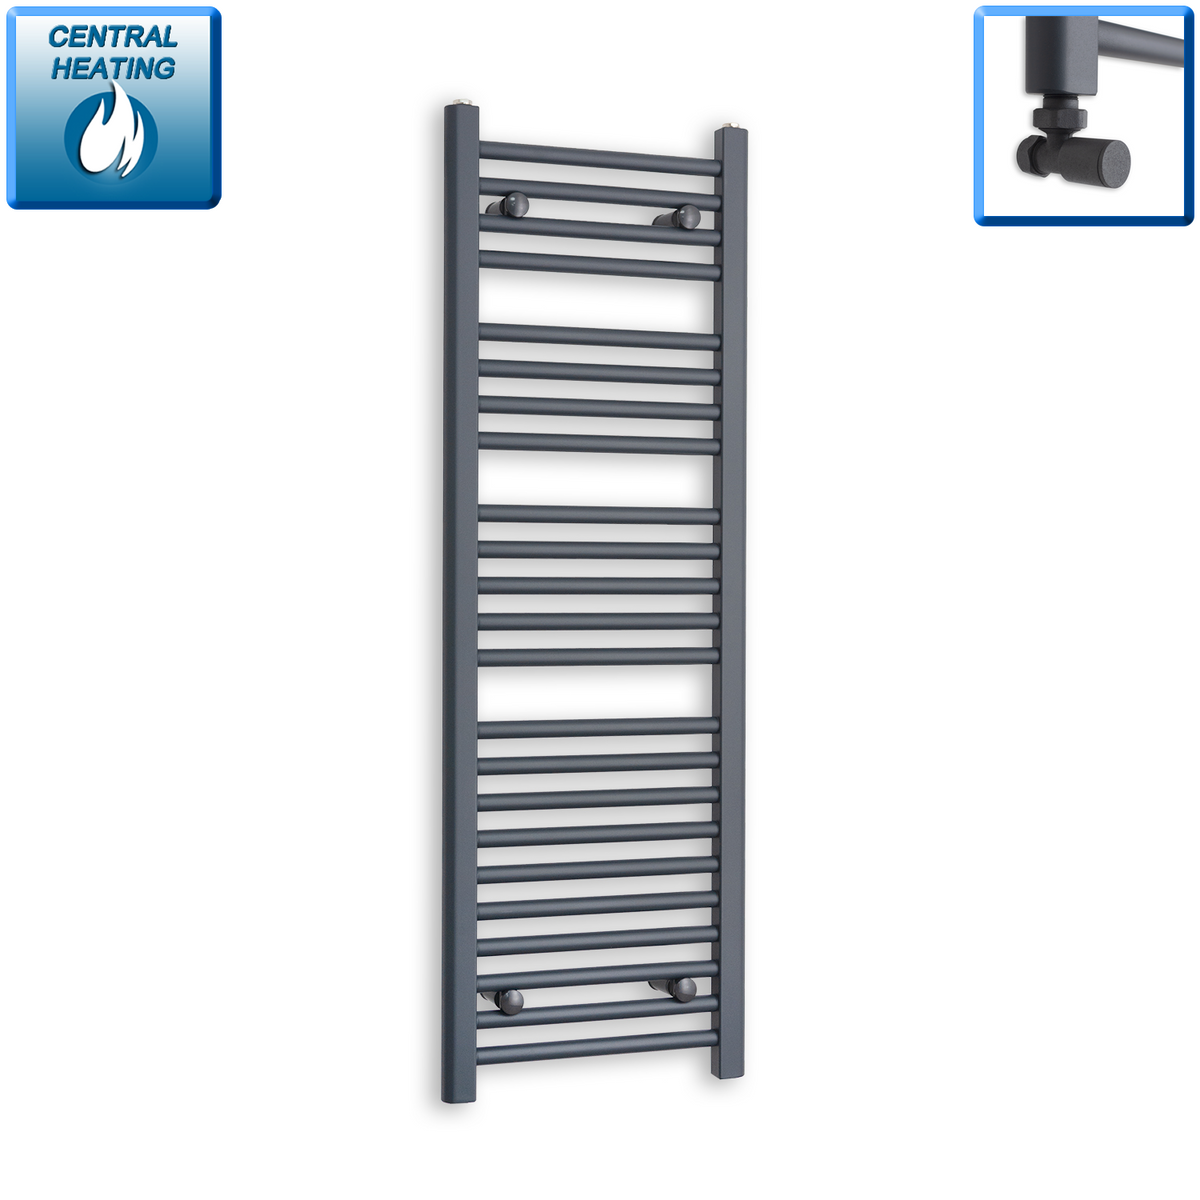 1200 x 400 Heated Straight Anthracite-Sand Grey Towel Radiator central heating